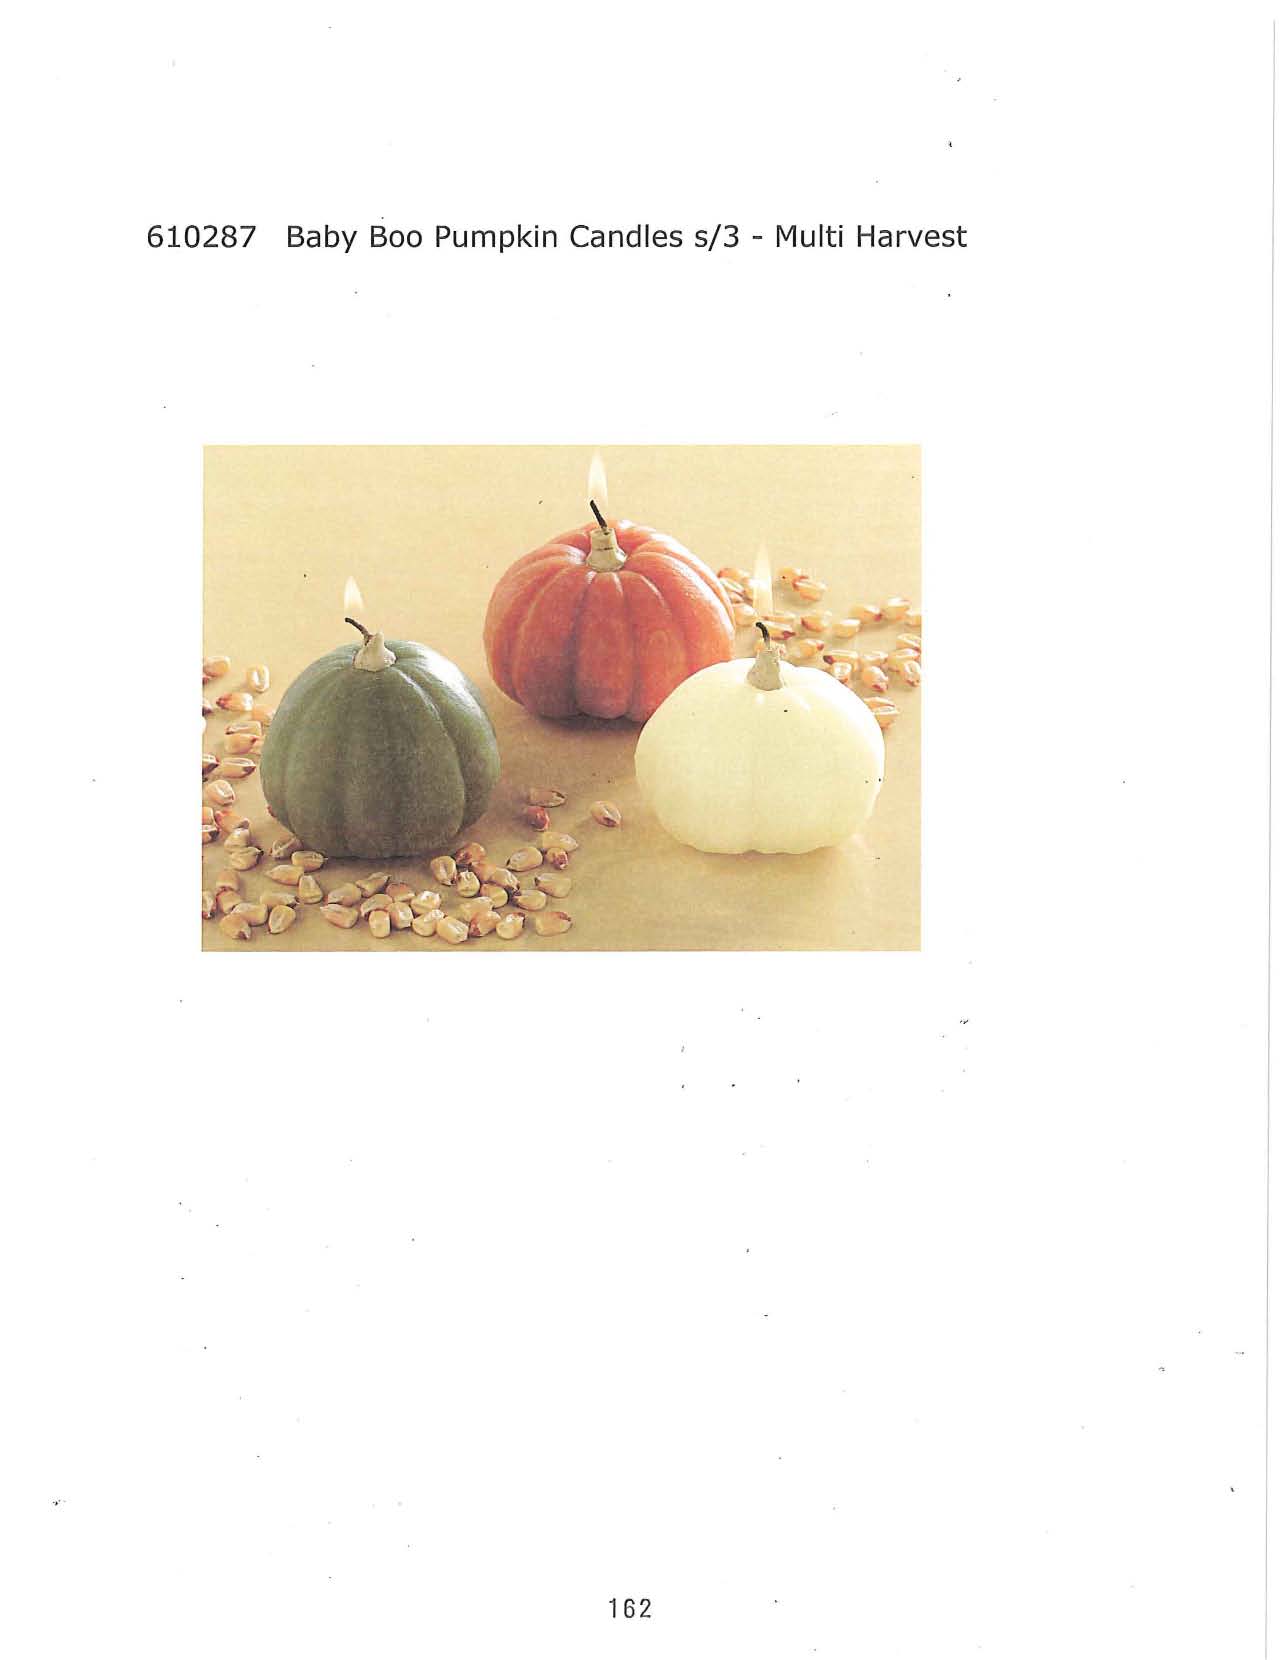 Baby Boo Pumpkin Candle s/3 - Multi Harvest